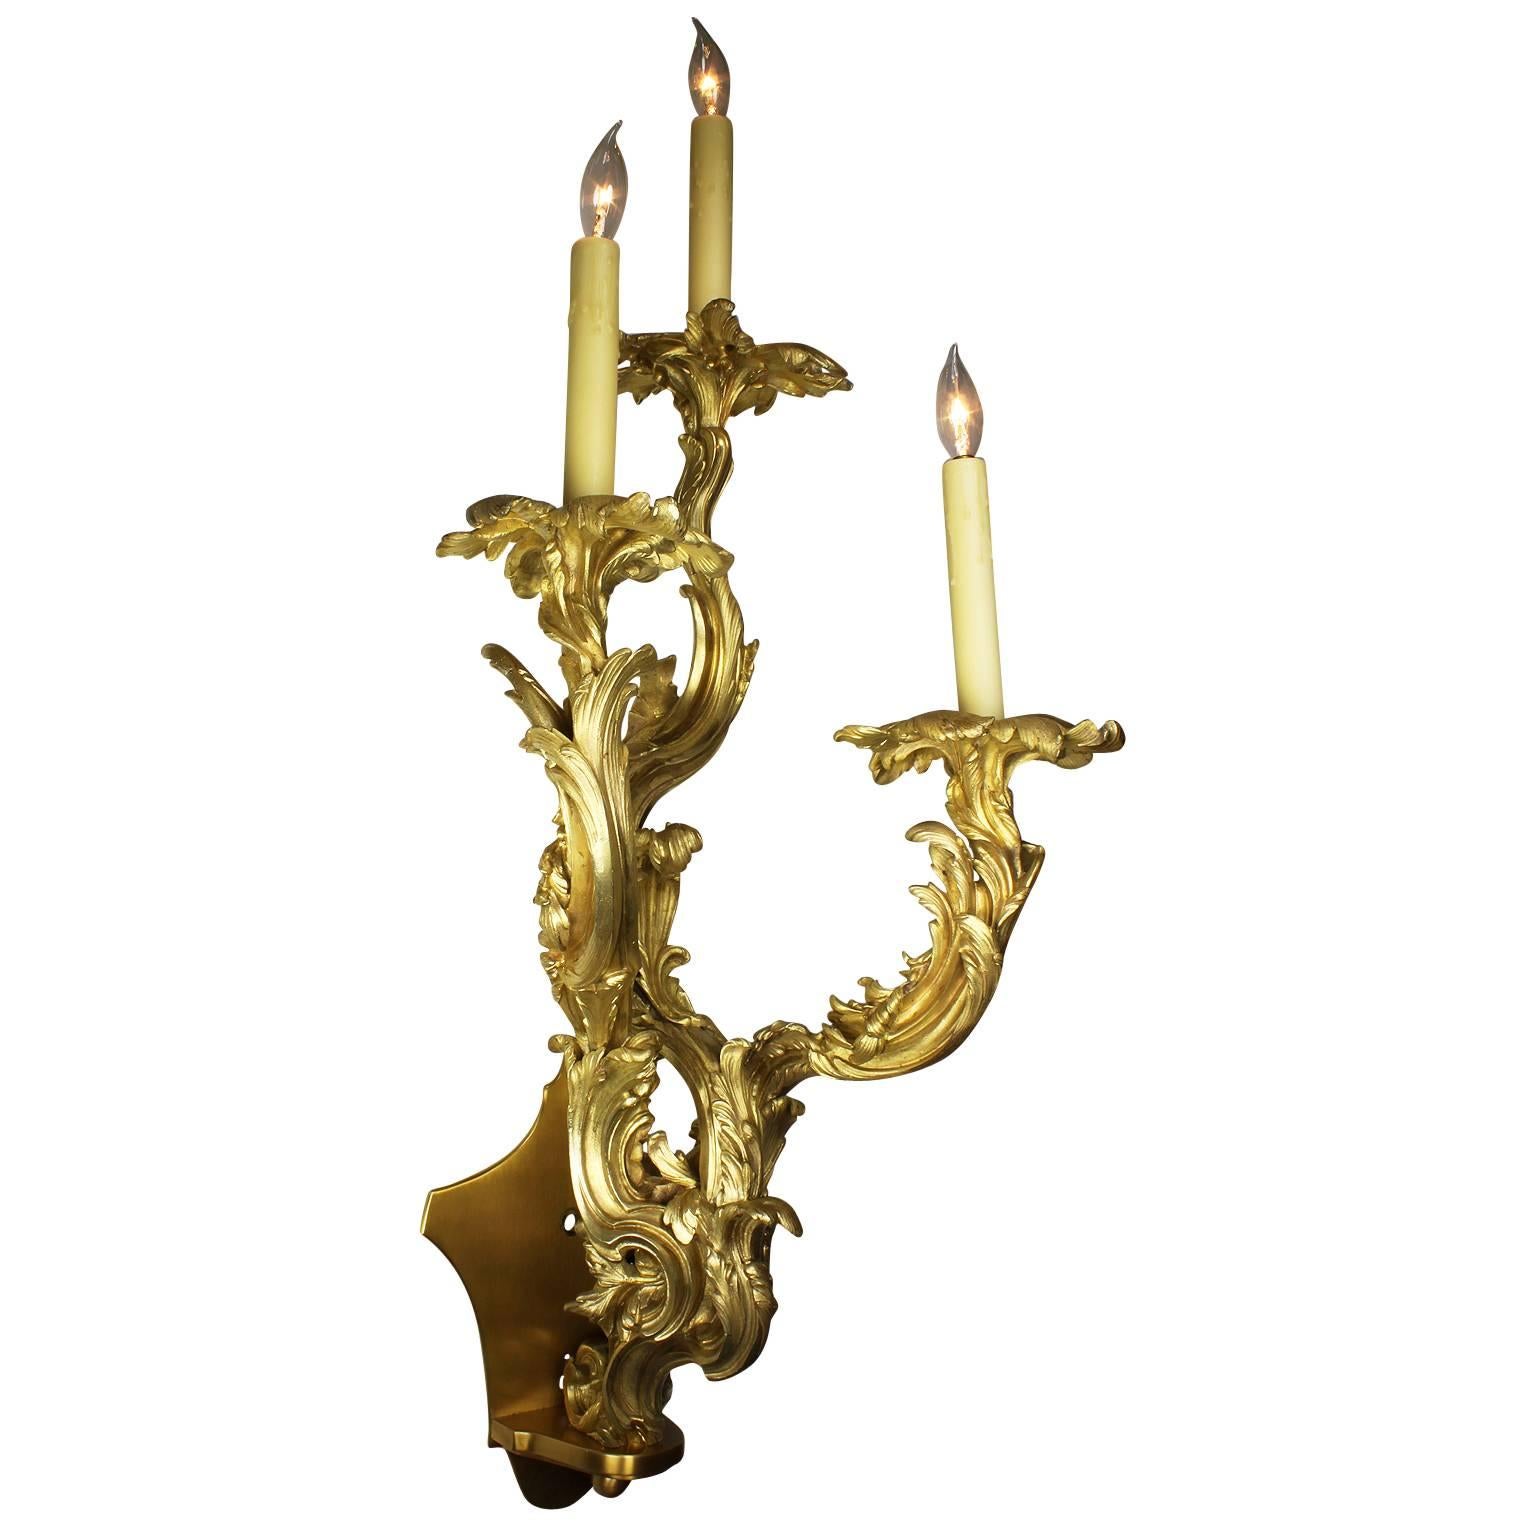 A very fine pair of French 19th century Louis XV style three-light gilt-bronze wall appliqués (sconces - wall lights). The three scrolled candle-arms, protruding from a gilt-bronze support, with a floral and acanthus design, Paris, circa